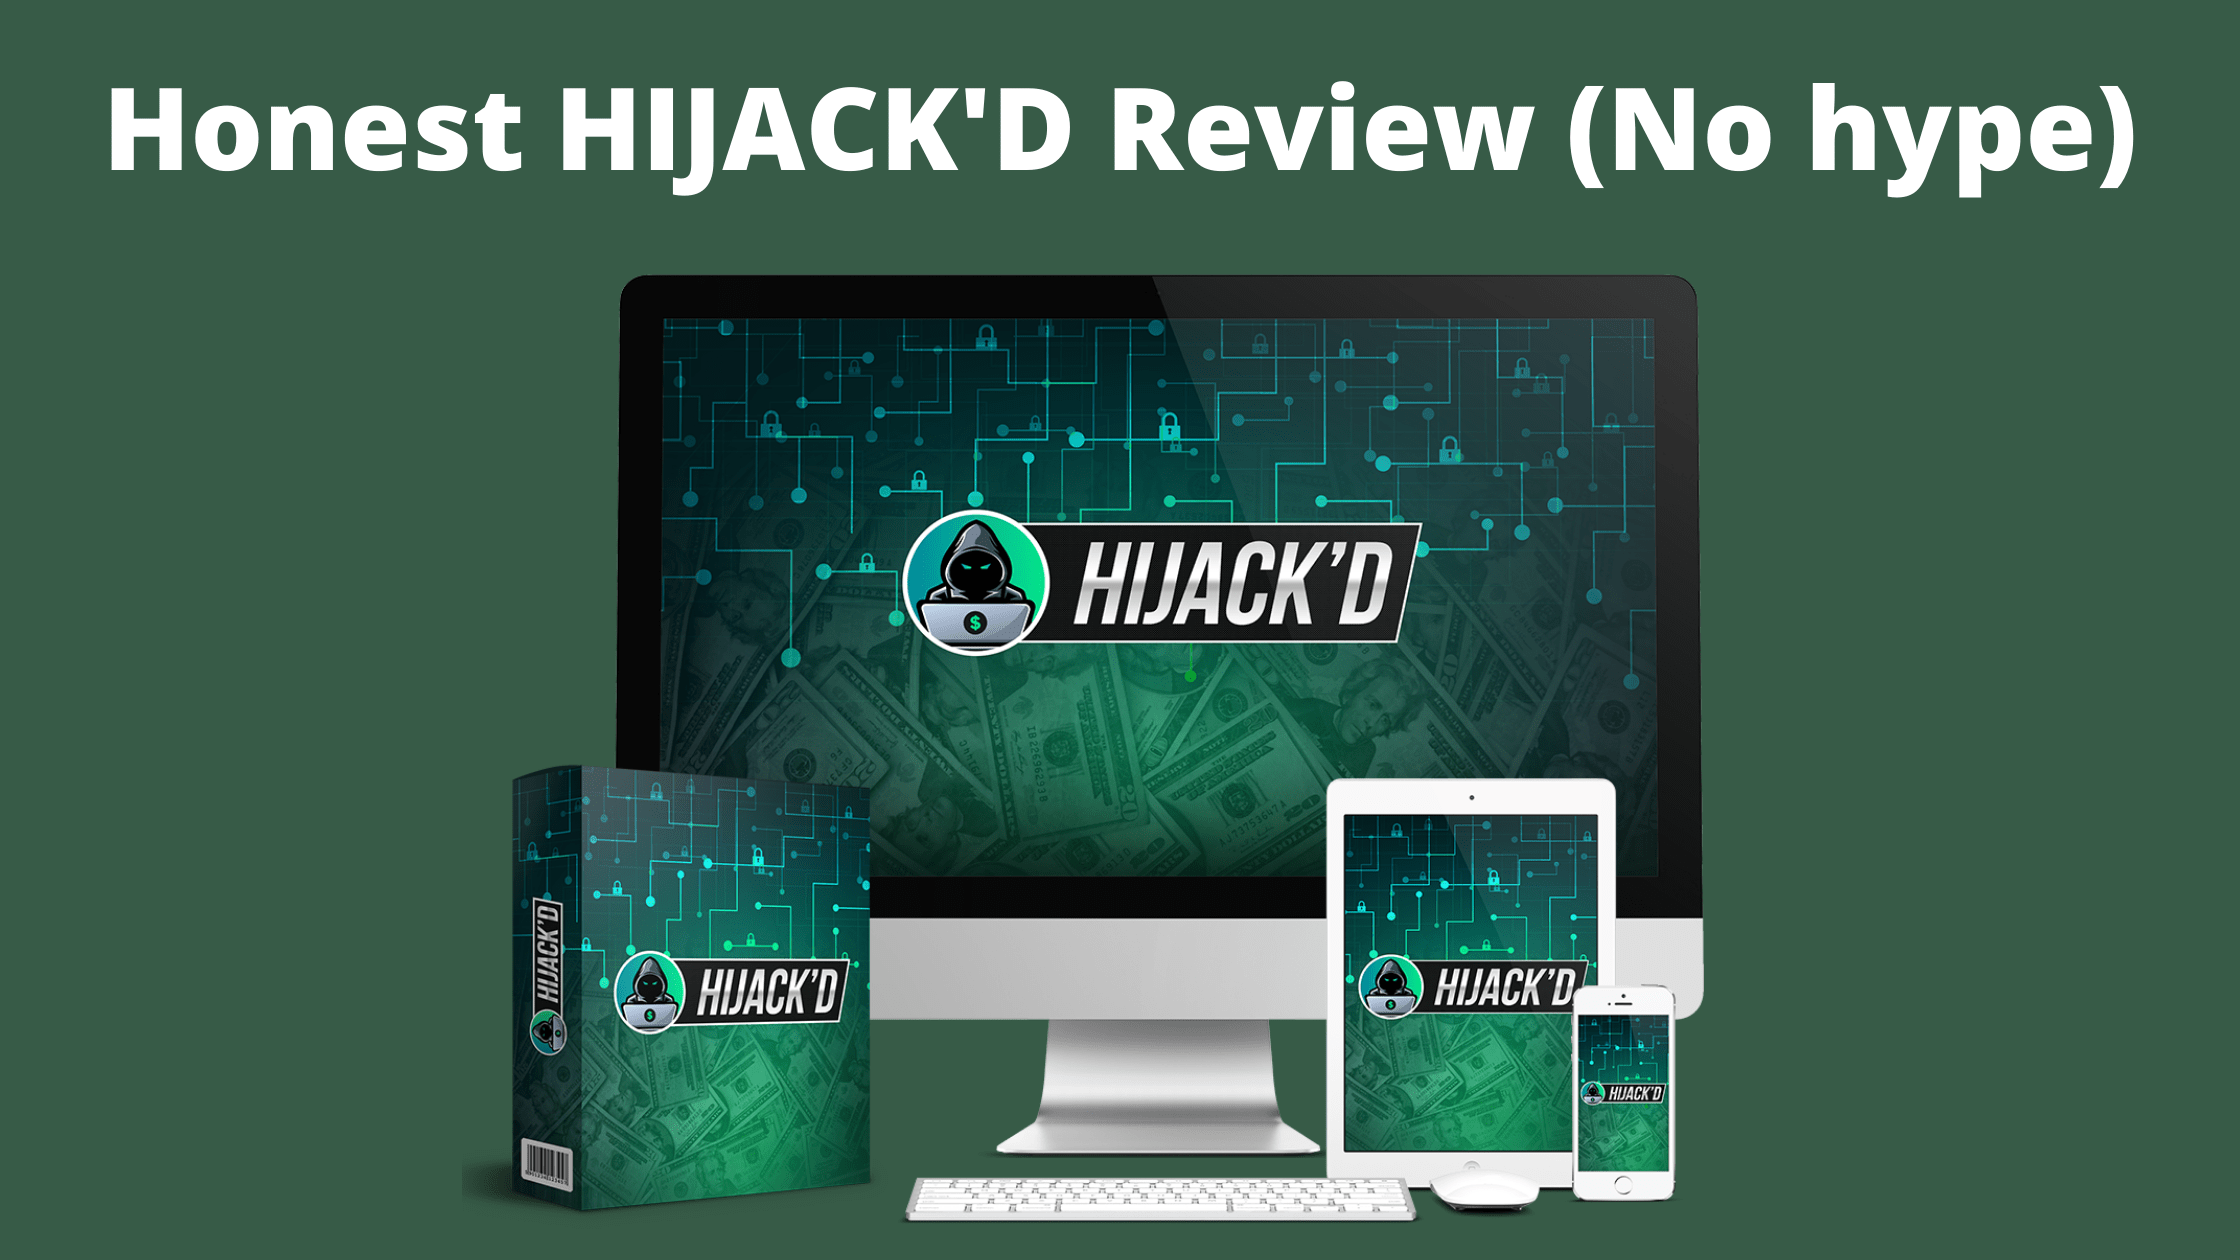 HIJACK'D Review